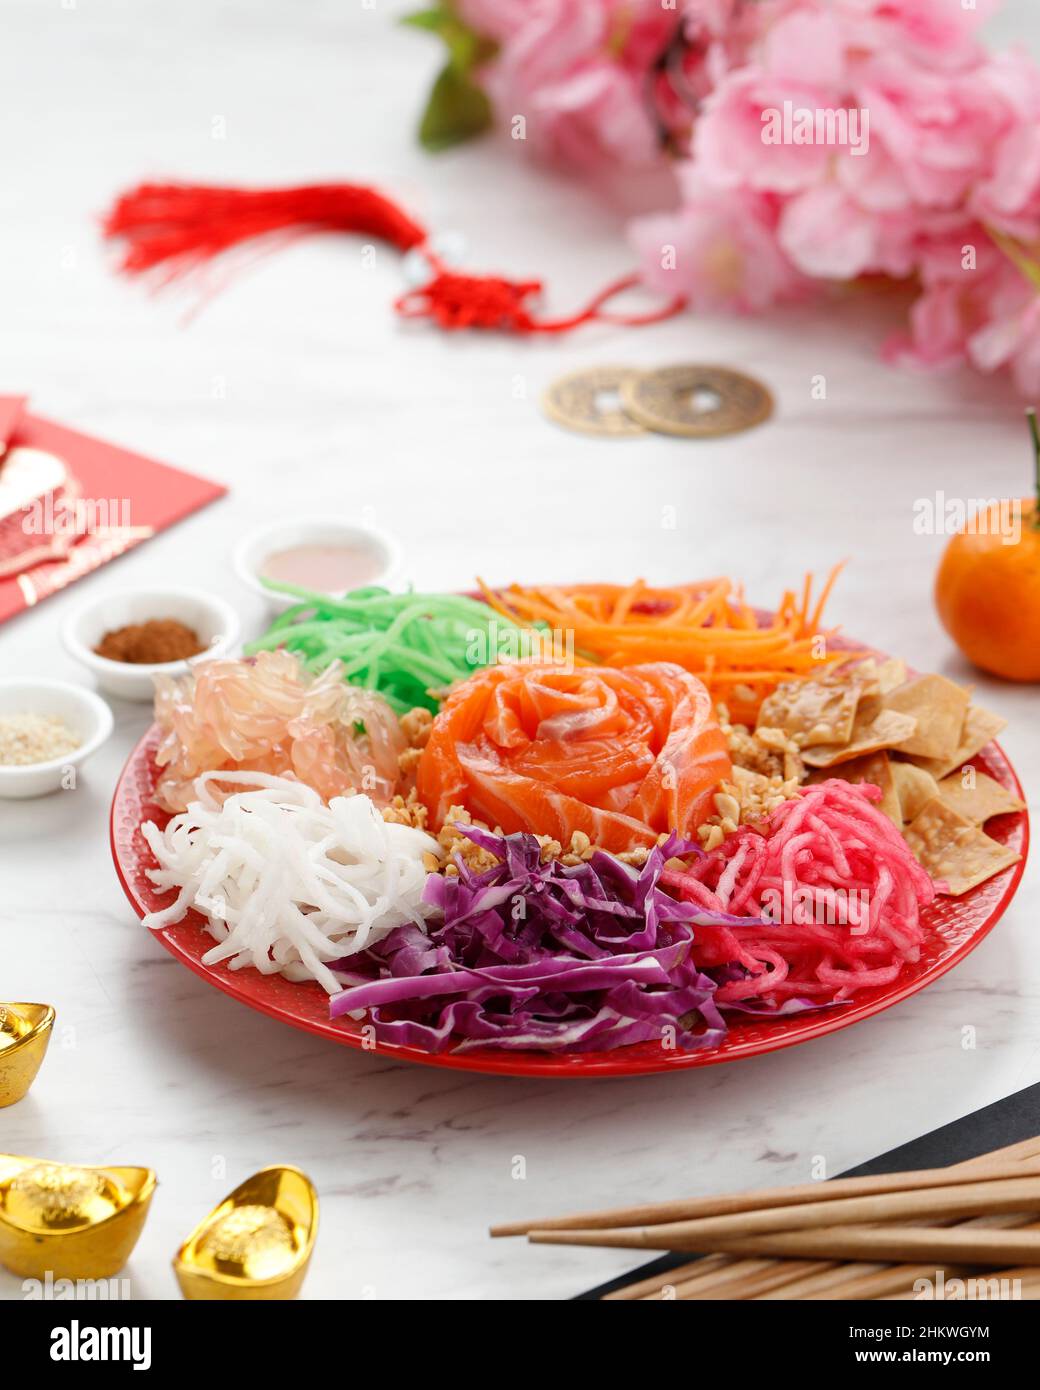 Delicious and Colorful Display of Chinese Prosperity Cuisine, Yee Sang or Prosperity Toss. Carrot Strips, Purple Cabbage, Raw Salmon, Ground Peanuts, Stock Photo